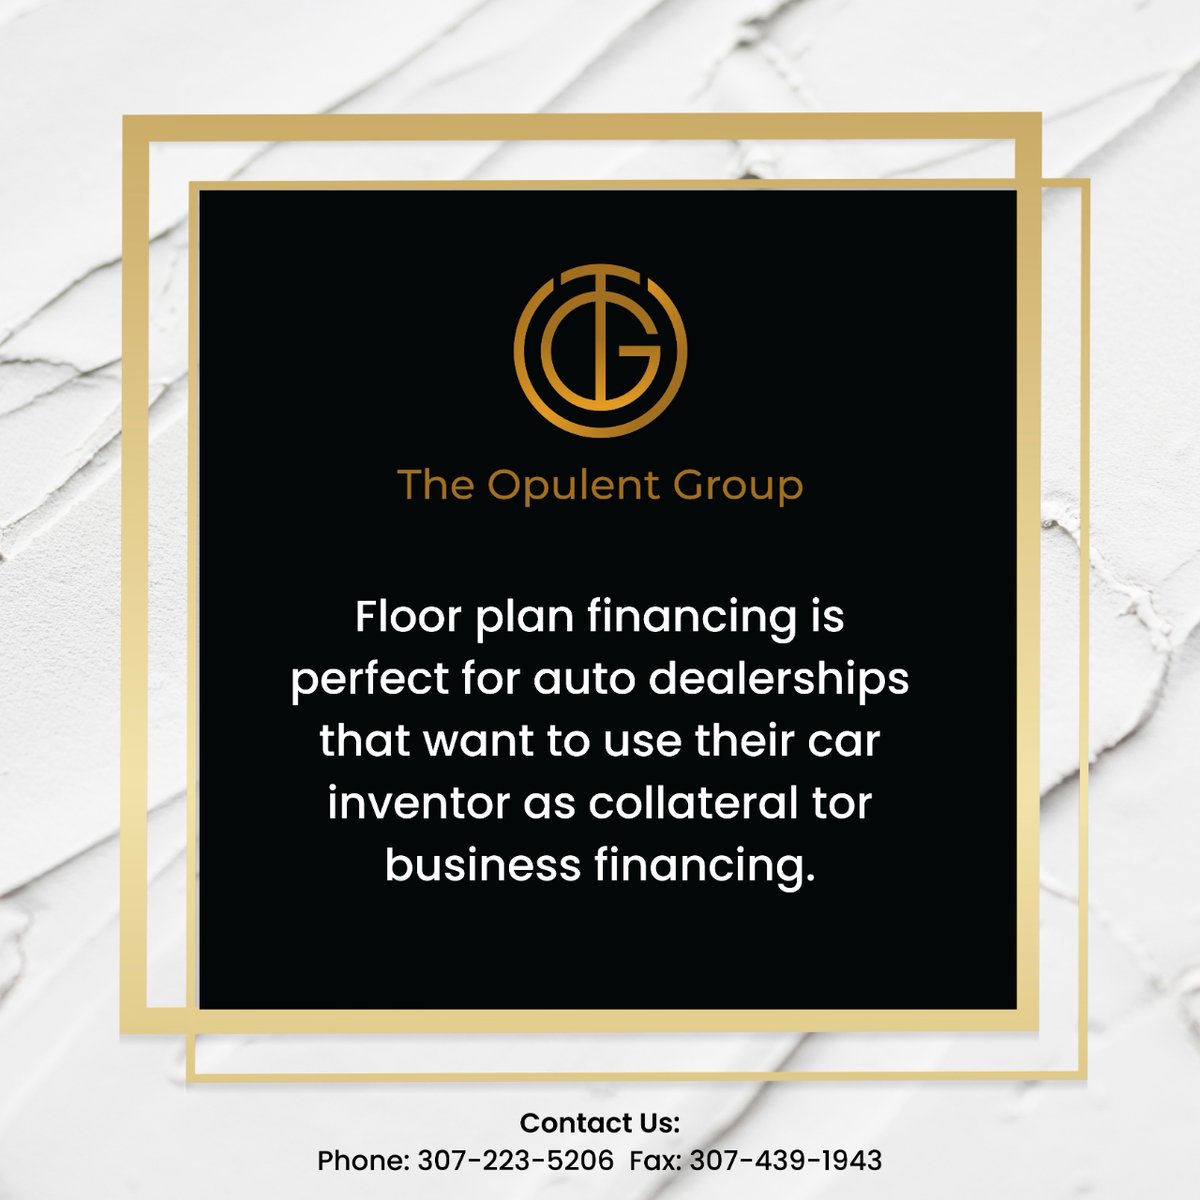 Having problems with of business credit. Contact us to get all kinds of business credit guidance from us!

#credittips #debtfree #fixyourcredit #loans #finance #creditispower #studentloans #creditrepairspecialist #financialfreedom #badcredit #fixmycredit #realestate